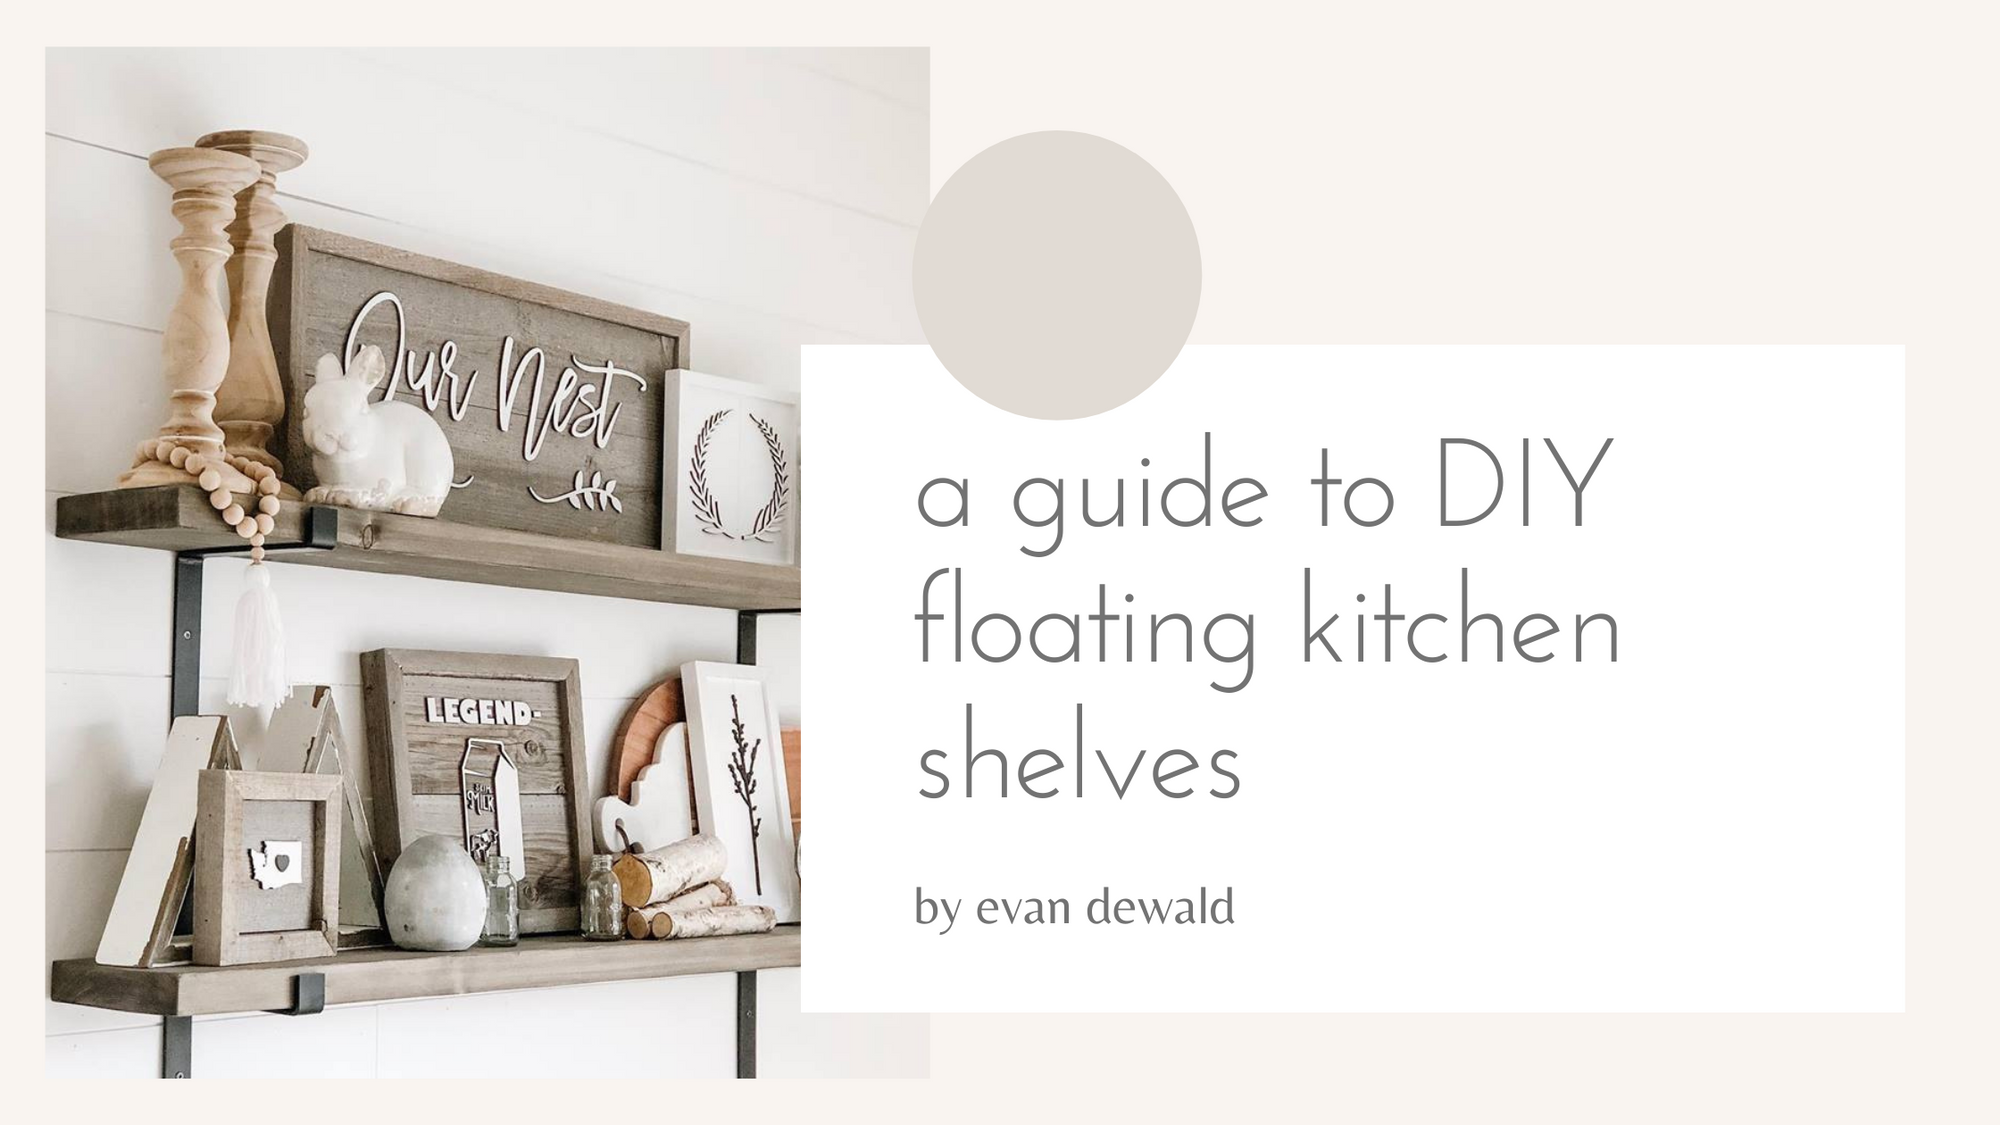 A guide to DIY floating kitchen shelves